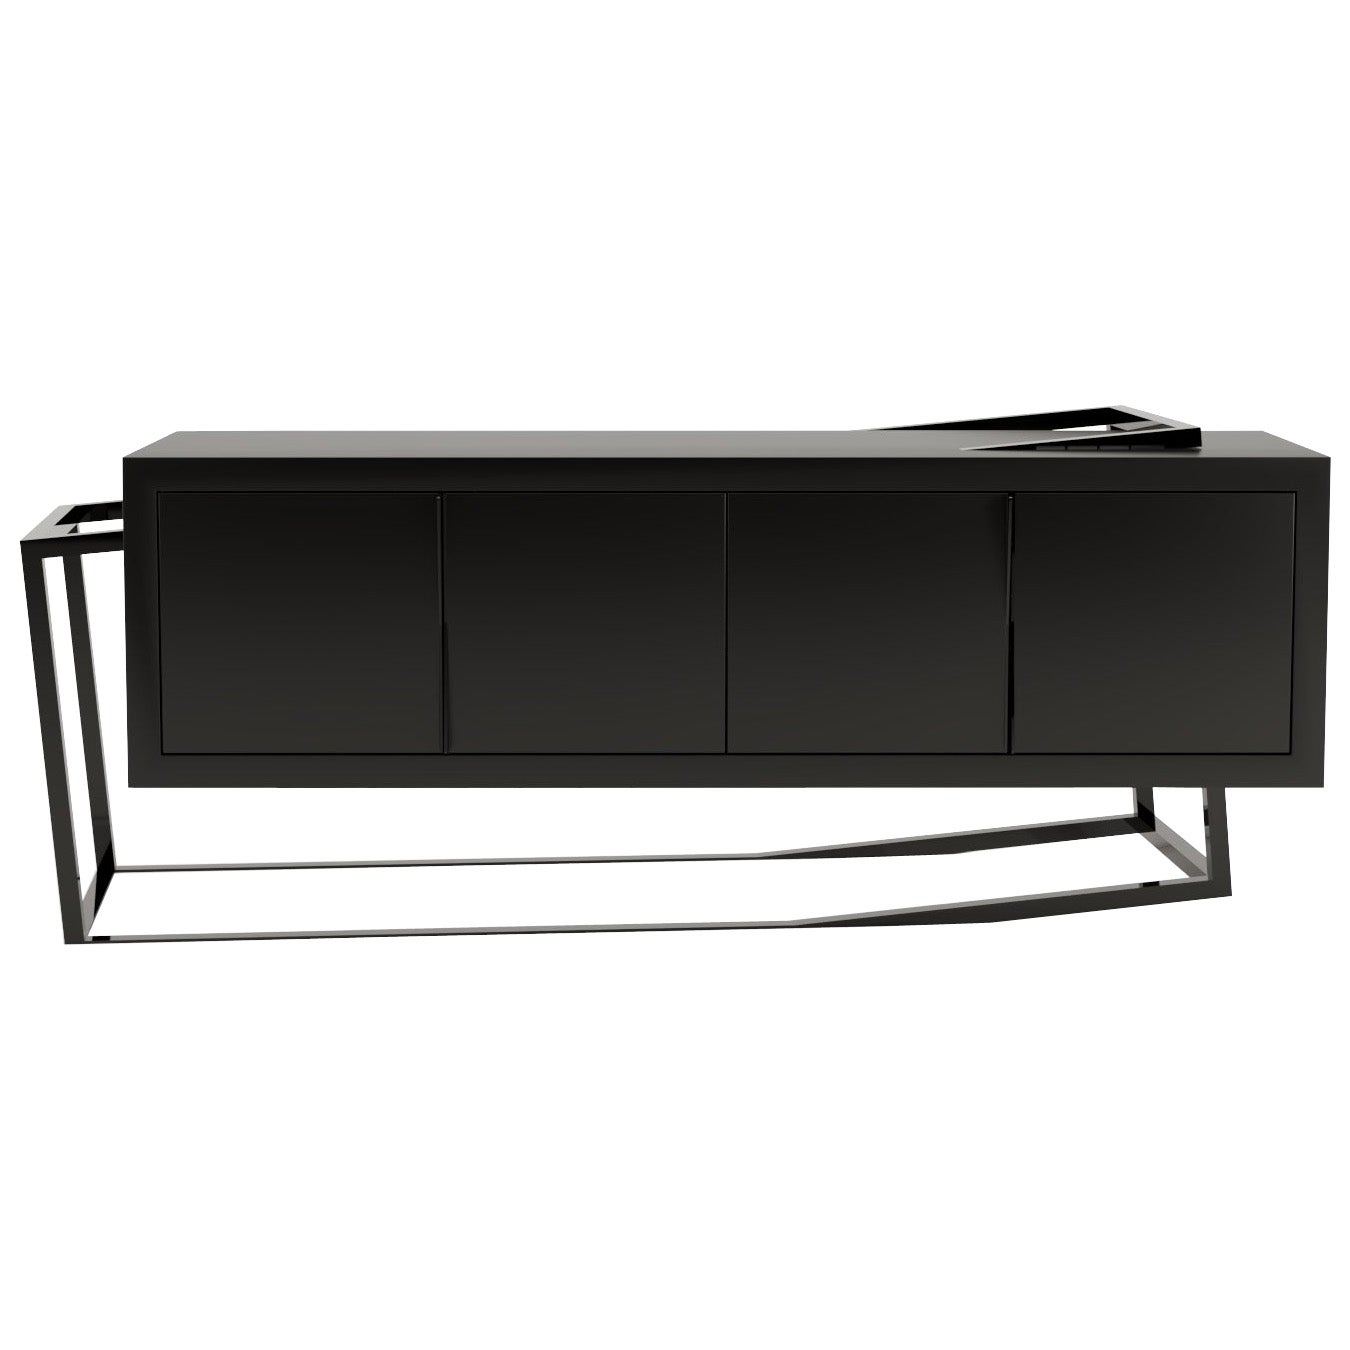 Modern Accent Credenza Sideboard Black Oak Wood High-Gloss Black Lacquered Steel For Sale